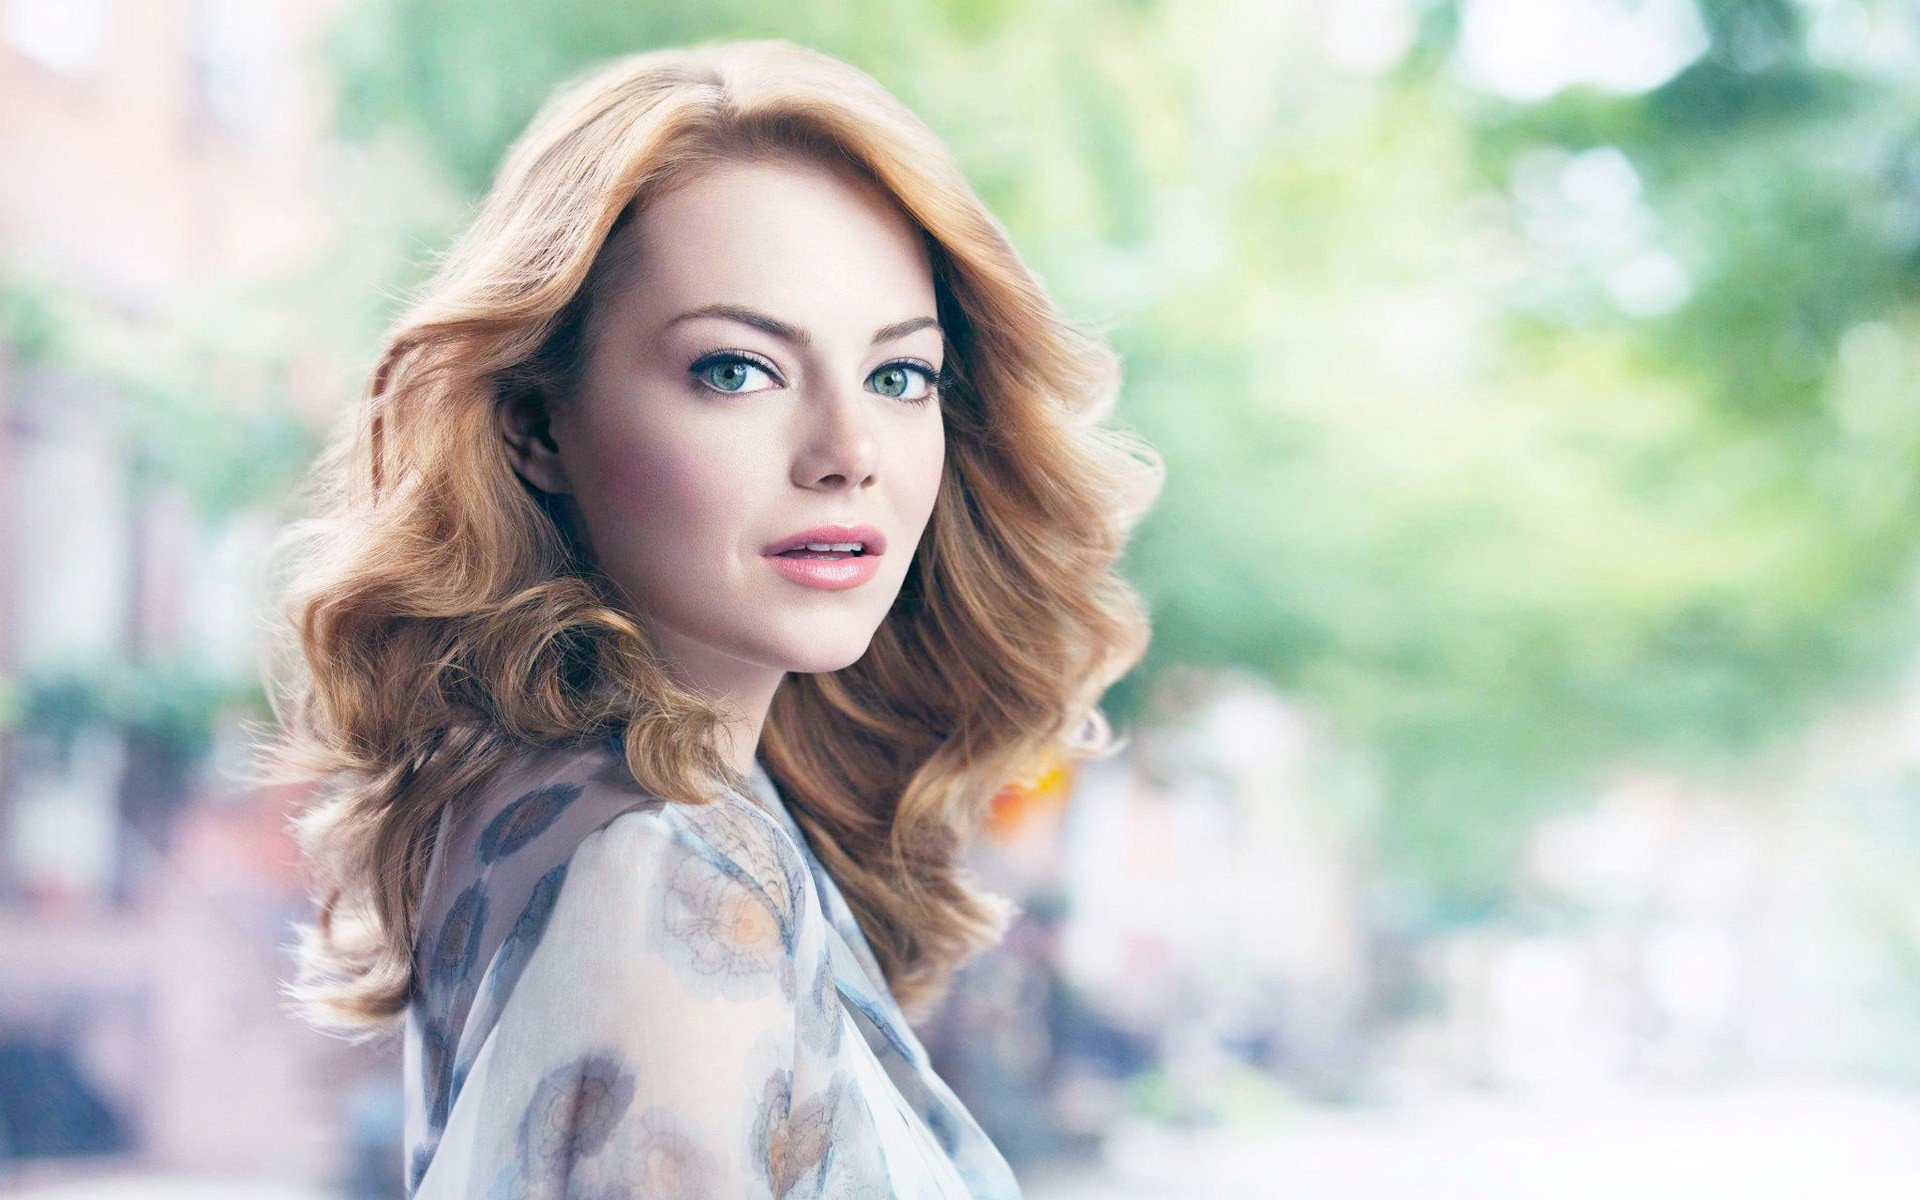 free Celebrities Wallpaper - Emma Stone HD Wallpapers| white ink tattoos | small white ink tattoos | white ink tattoos on hand | white ink tattoo artists | skull tattoos | unique skull tattoos | skull tattoos for females | skull tattoos on hand | skull tattoos for men sleeves | simple skull tattoos | best skull tattoos | skull tattoos designs for men | small skull tattoos | angel tattoos | small angel tattoos | beautiful angel tattoos | angel tattoos sleeve | angel tattoos on arm | angel tattoos gallery | small guardian angel tattoos | neck tattoos | neck tattoos small | female neck tattoos | front neck tattoos | back neck tattoos | side neck tattoos for guys | neck tattoos pictures